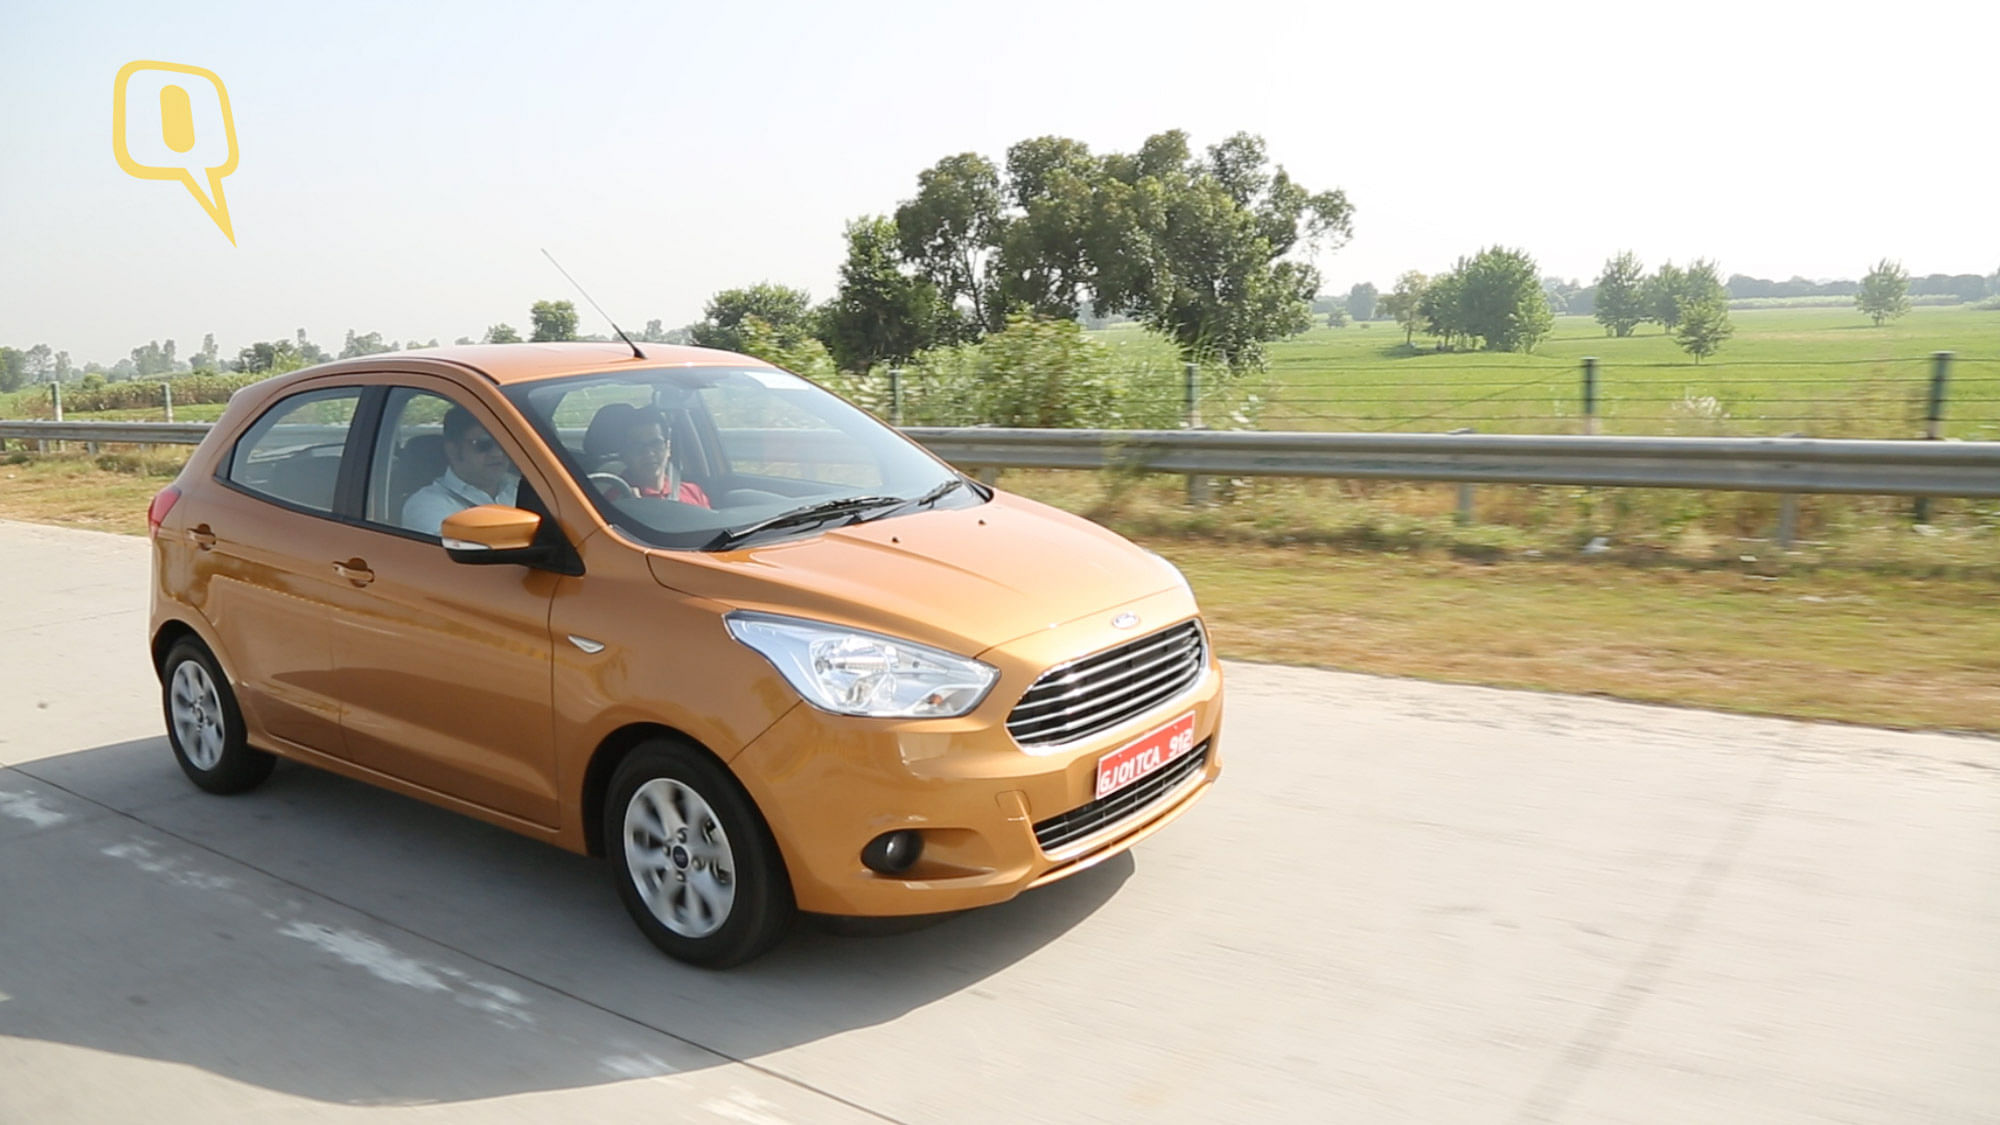 Ford and M&amp;M will work on projects for emerging markets like India. Image used for representational purposes.